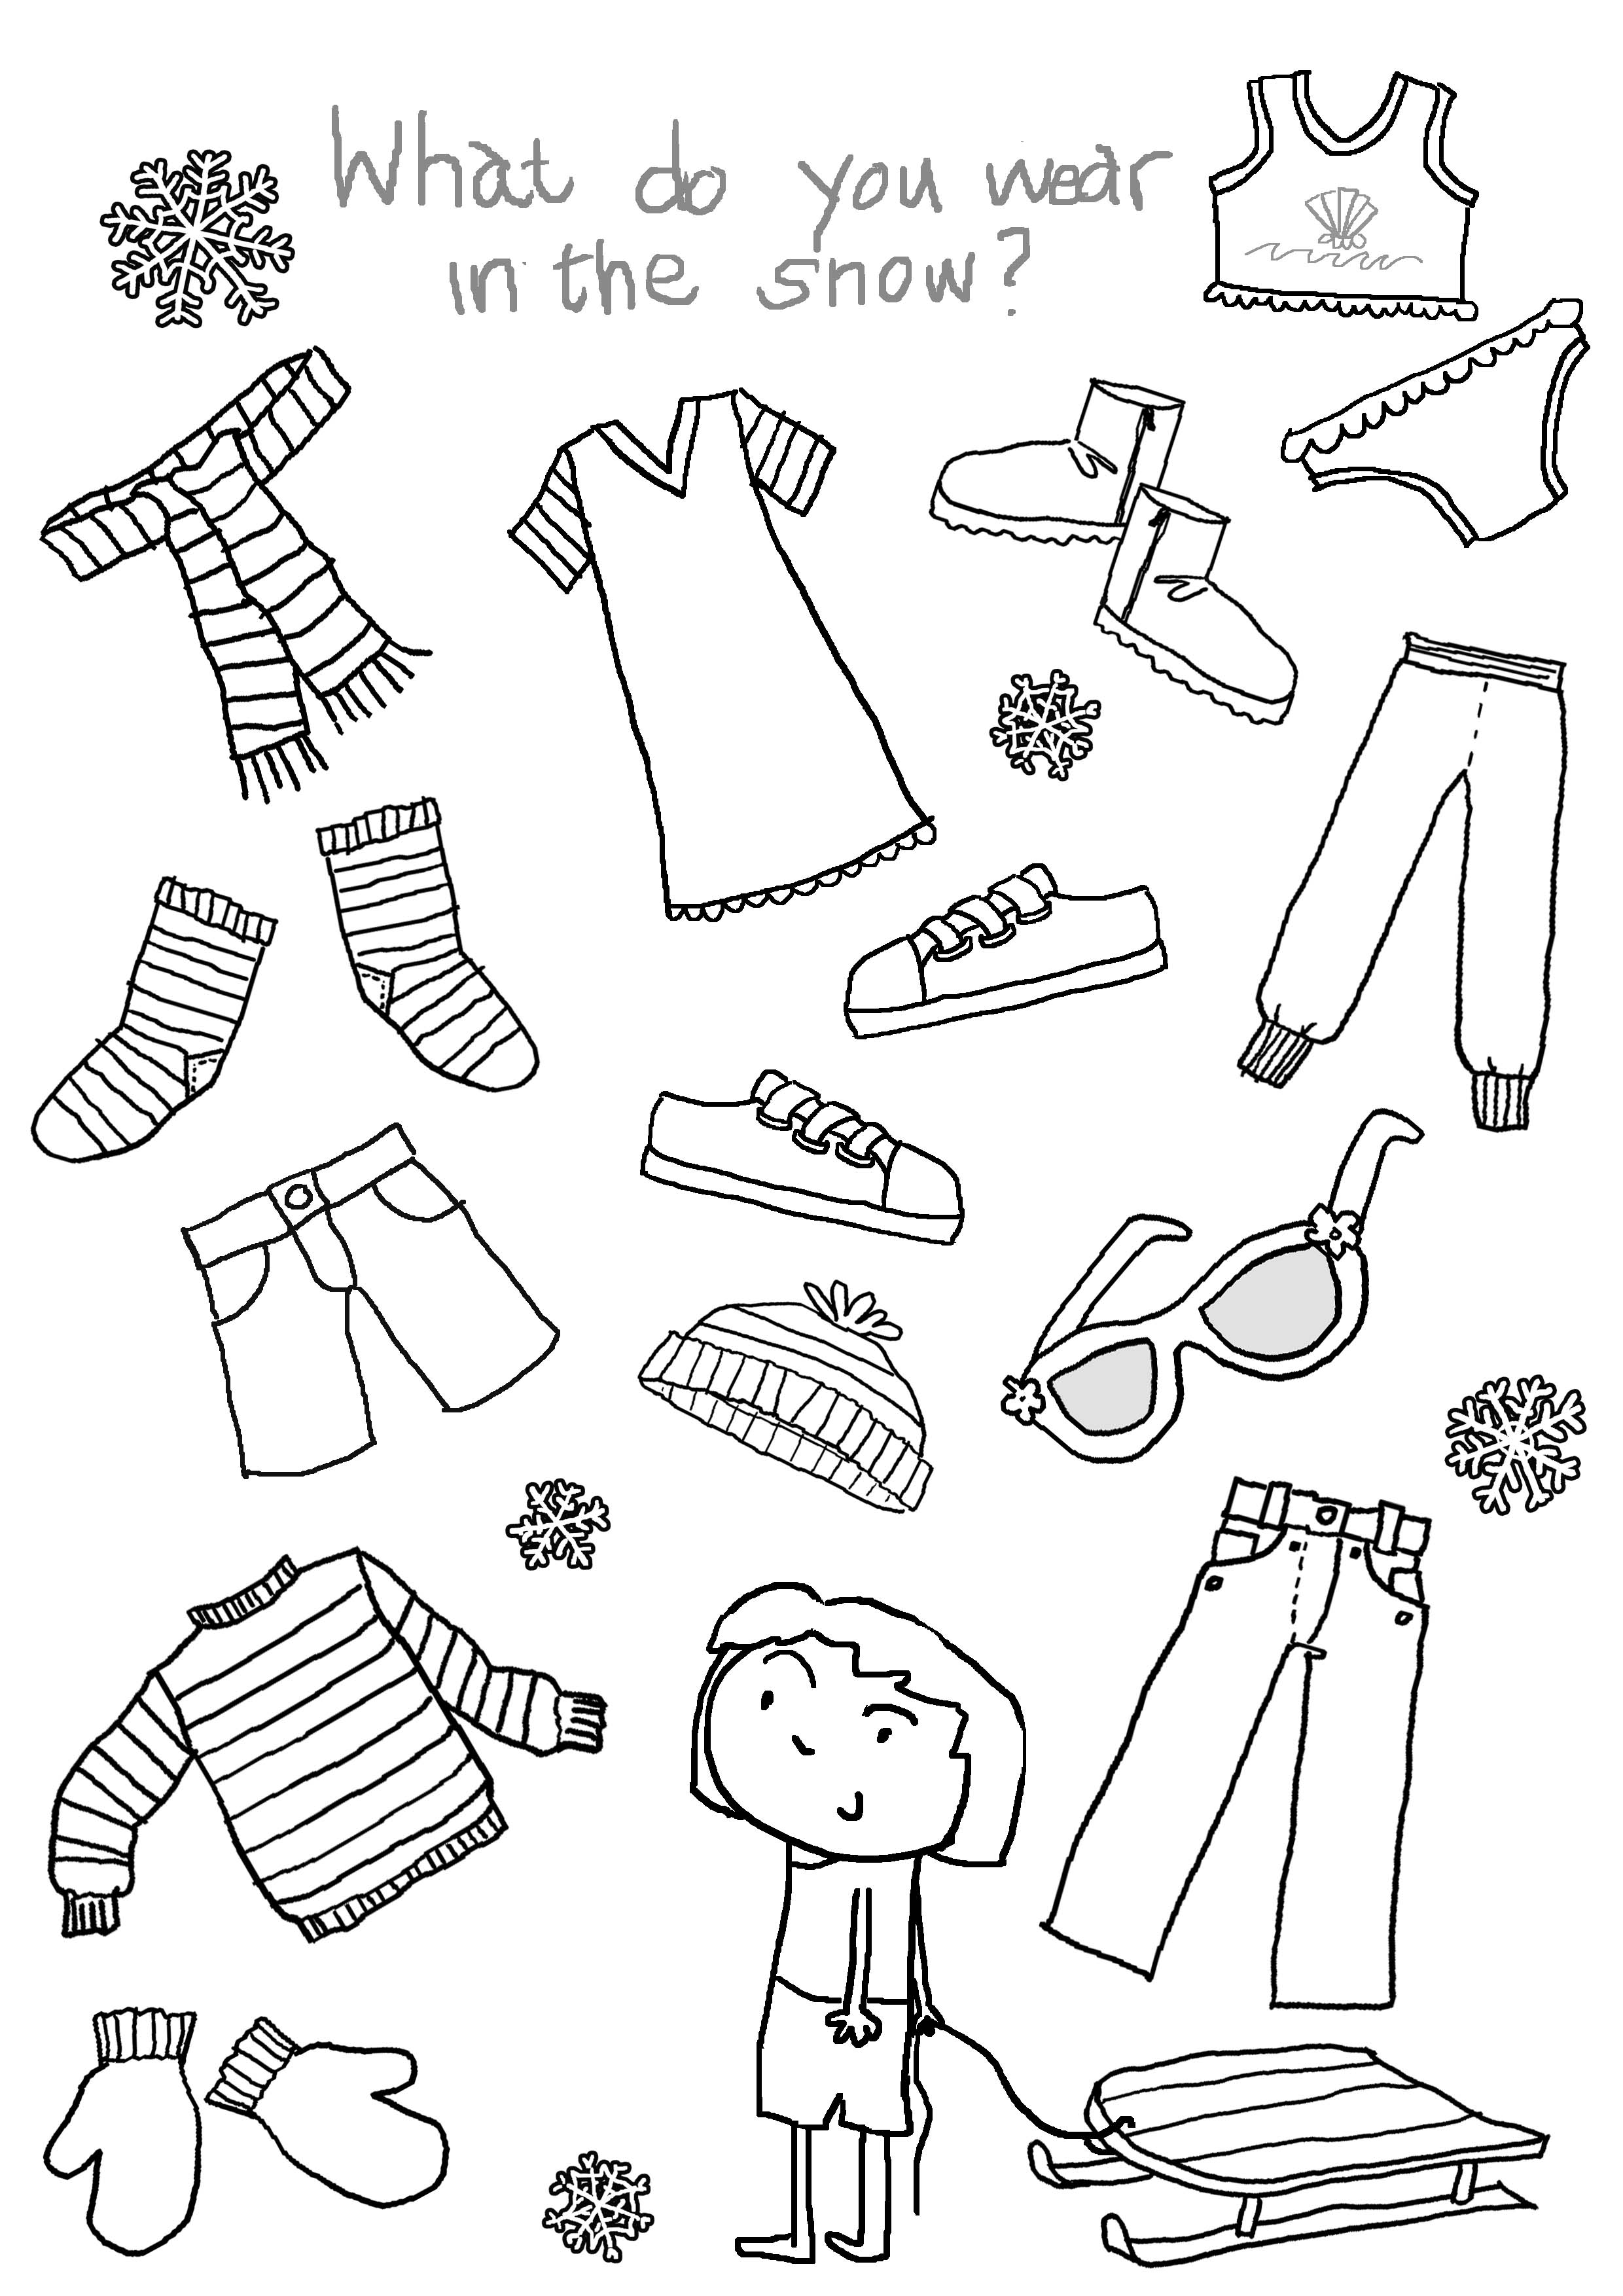 14 Best Images of Clothes For Children Worksheets Winter Clothes